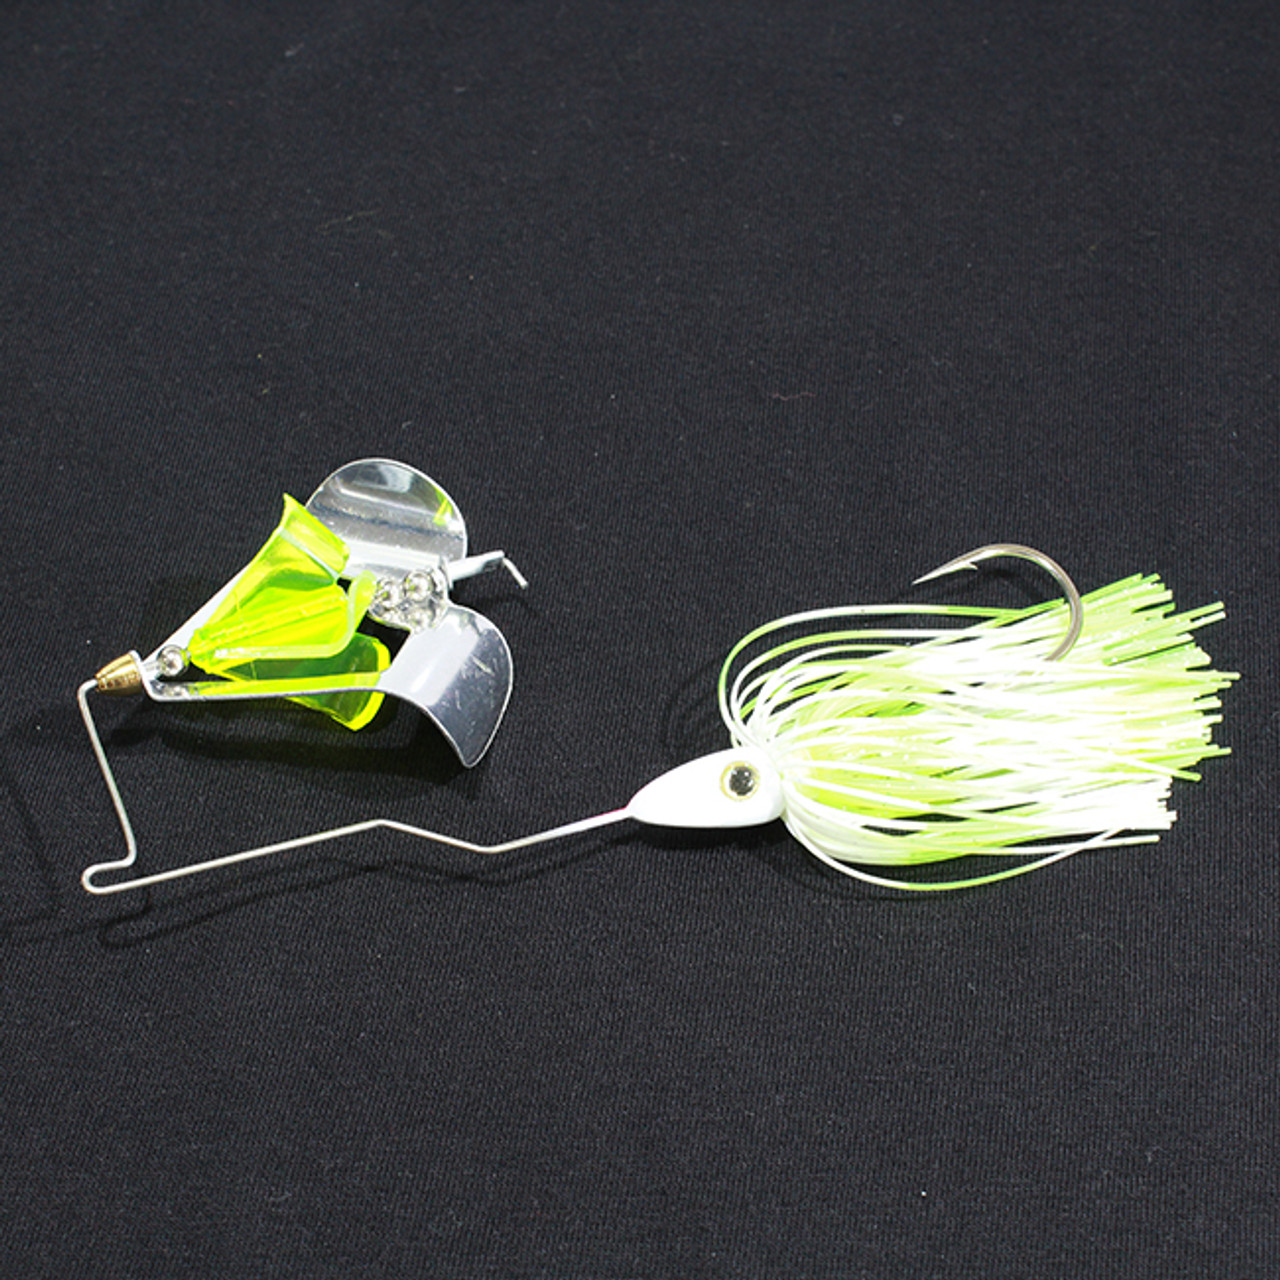 Lucky Tackle Box - The Evolution Baits GrassBurner Buzzbait is